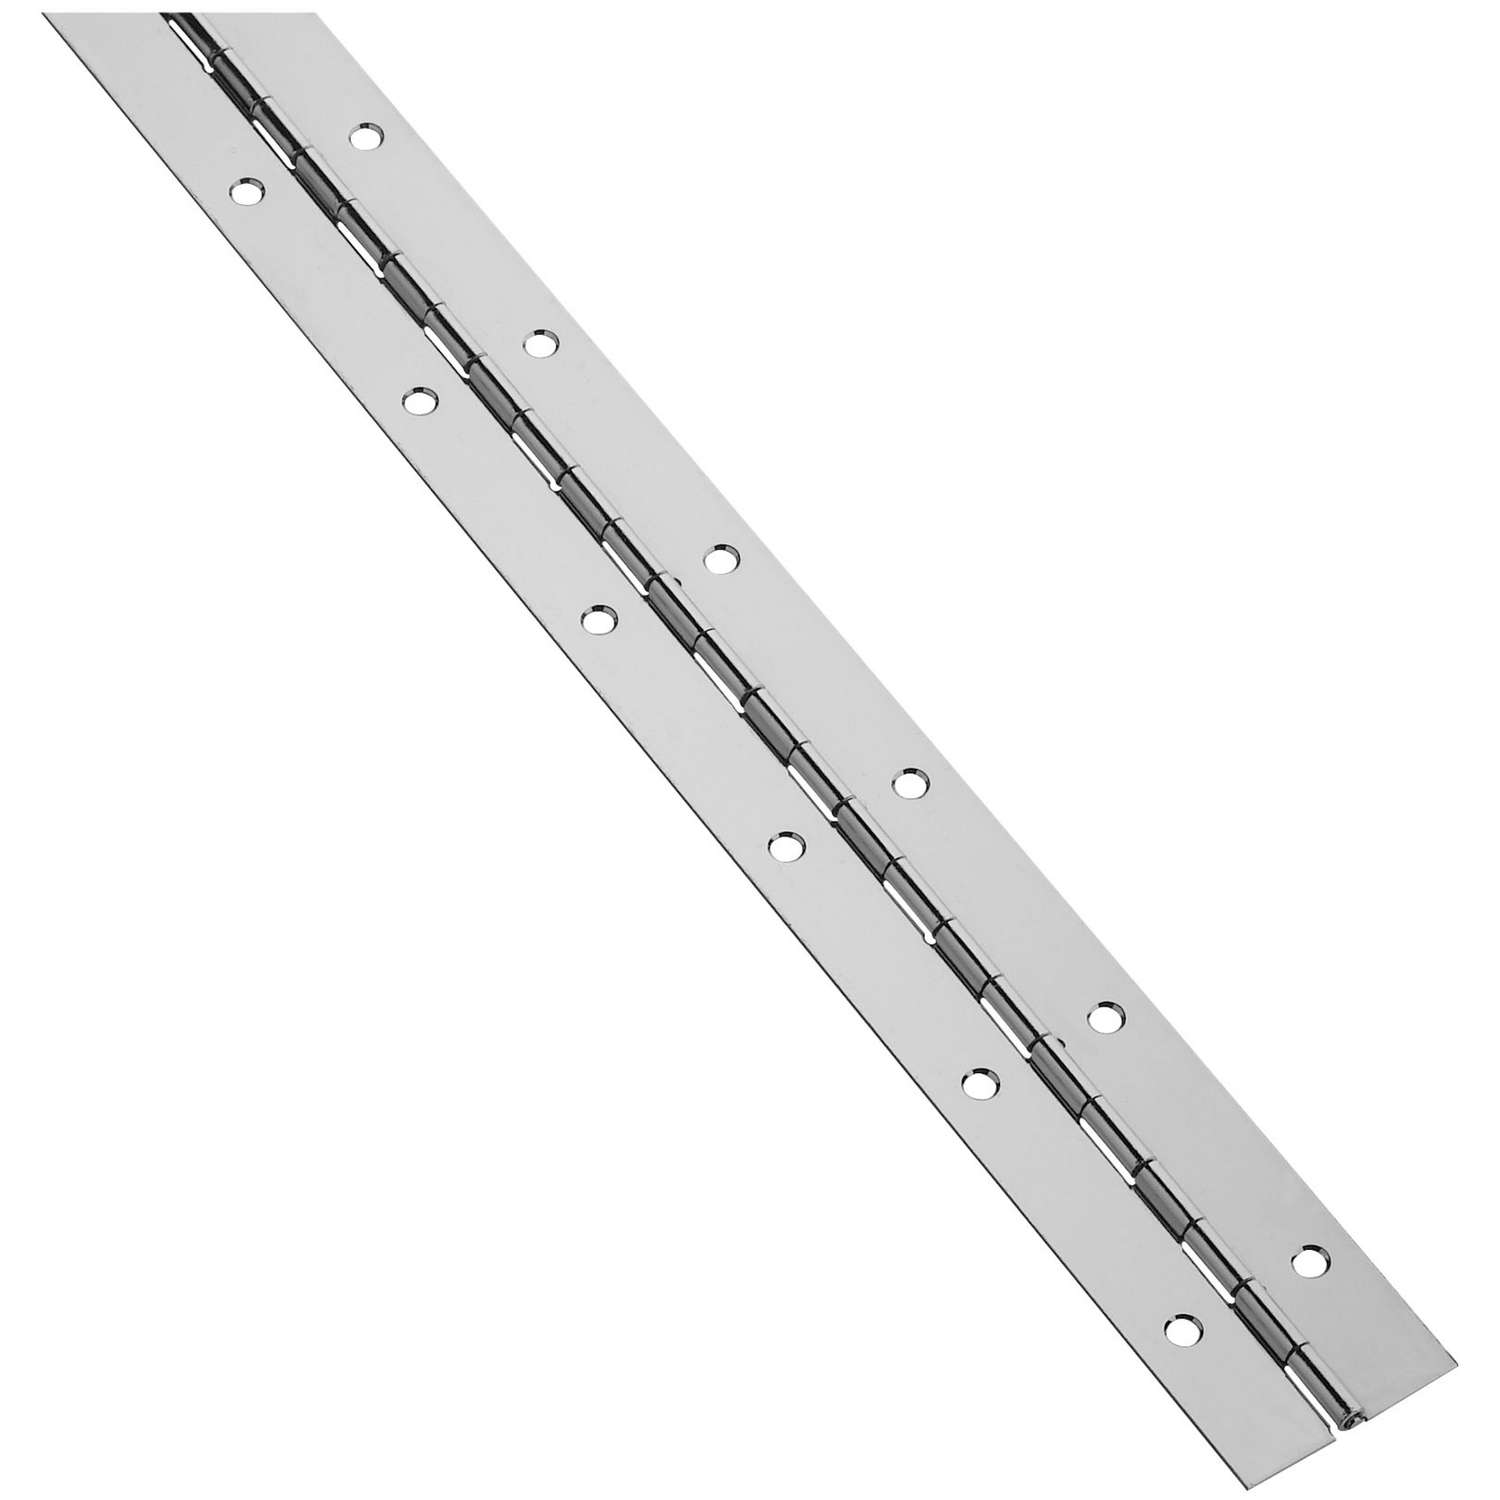  National  Hardware  72 in L Nickel Continuous Hinge 1 pk 